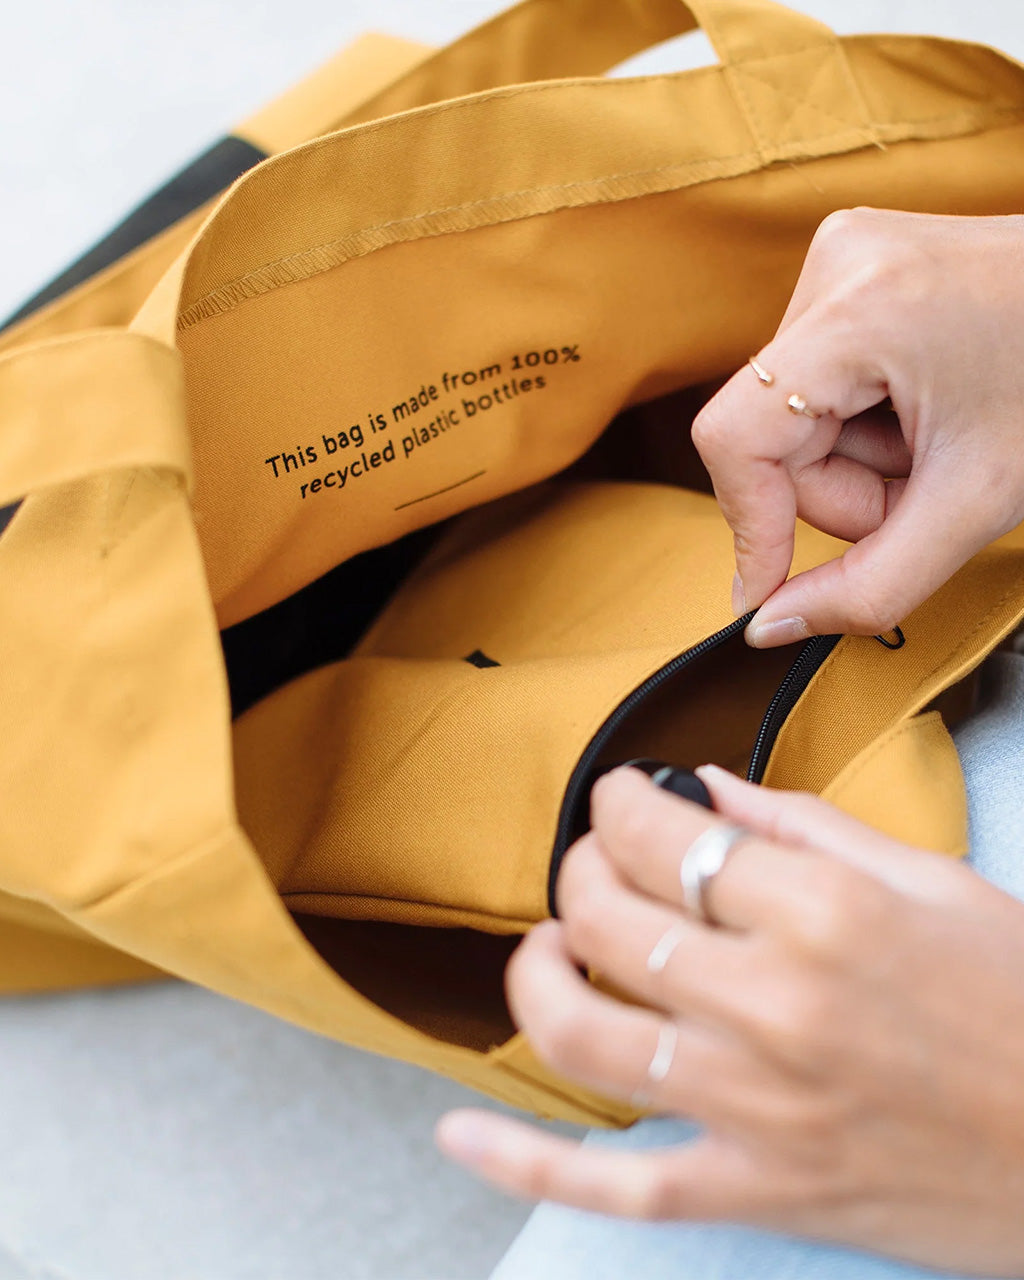 Native Union Tote Bag Lite: Your Sustainable Everyday Adventure Bag –  BrandsWalk